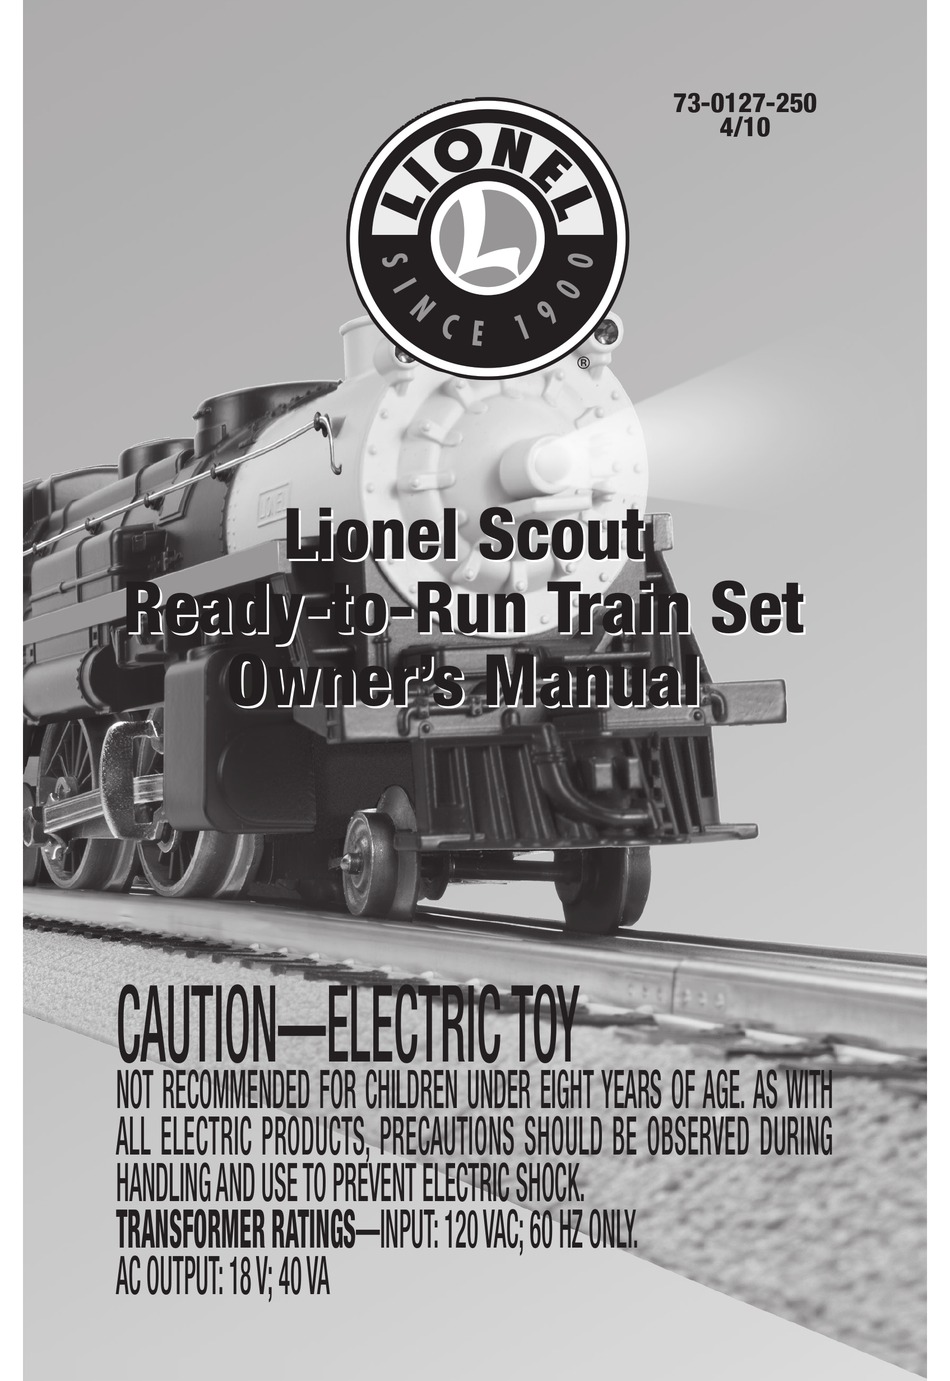 LIONEL 1110 SCOUT TRAINS WITH MANUMATIC CONTROL INSTRUCTIONS PHOTOCOPY 